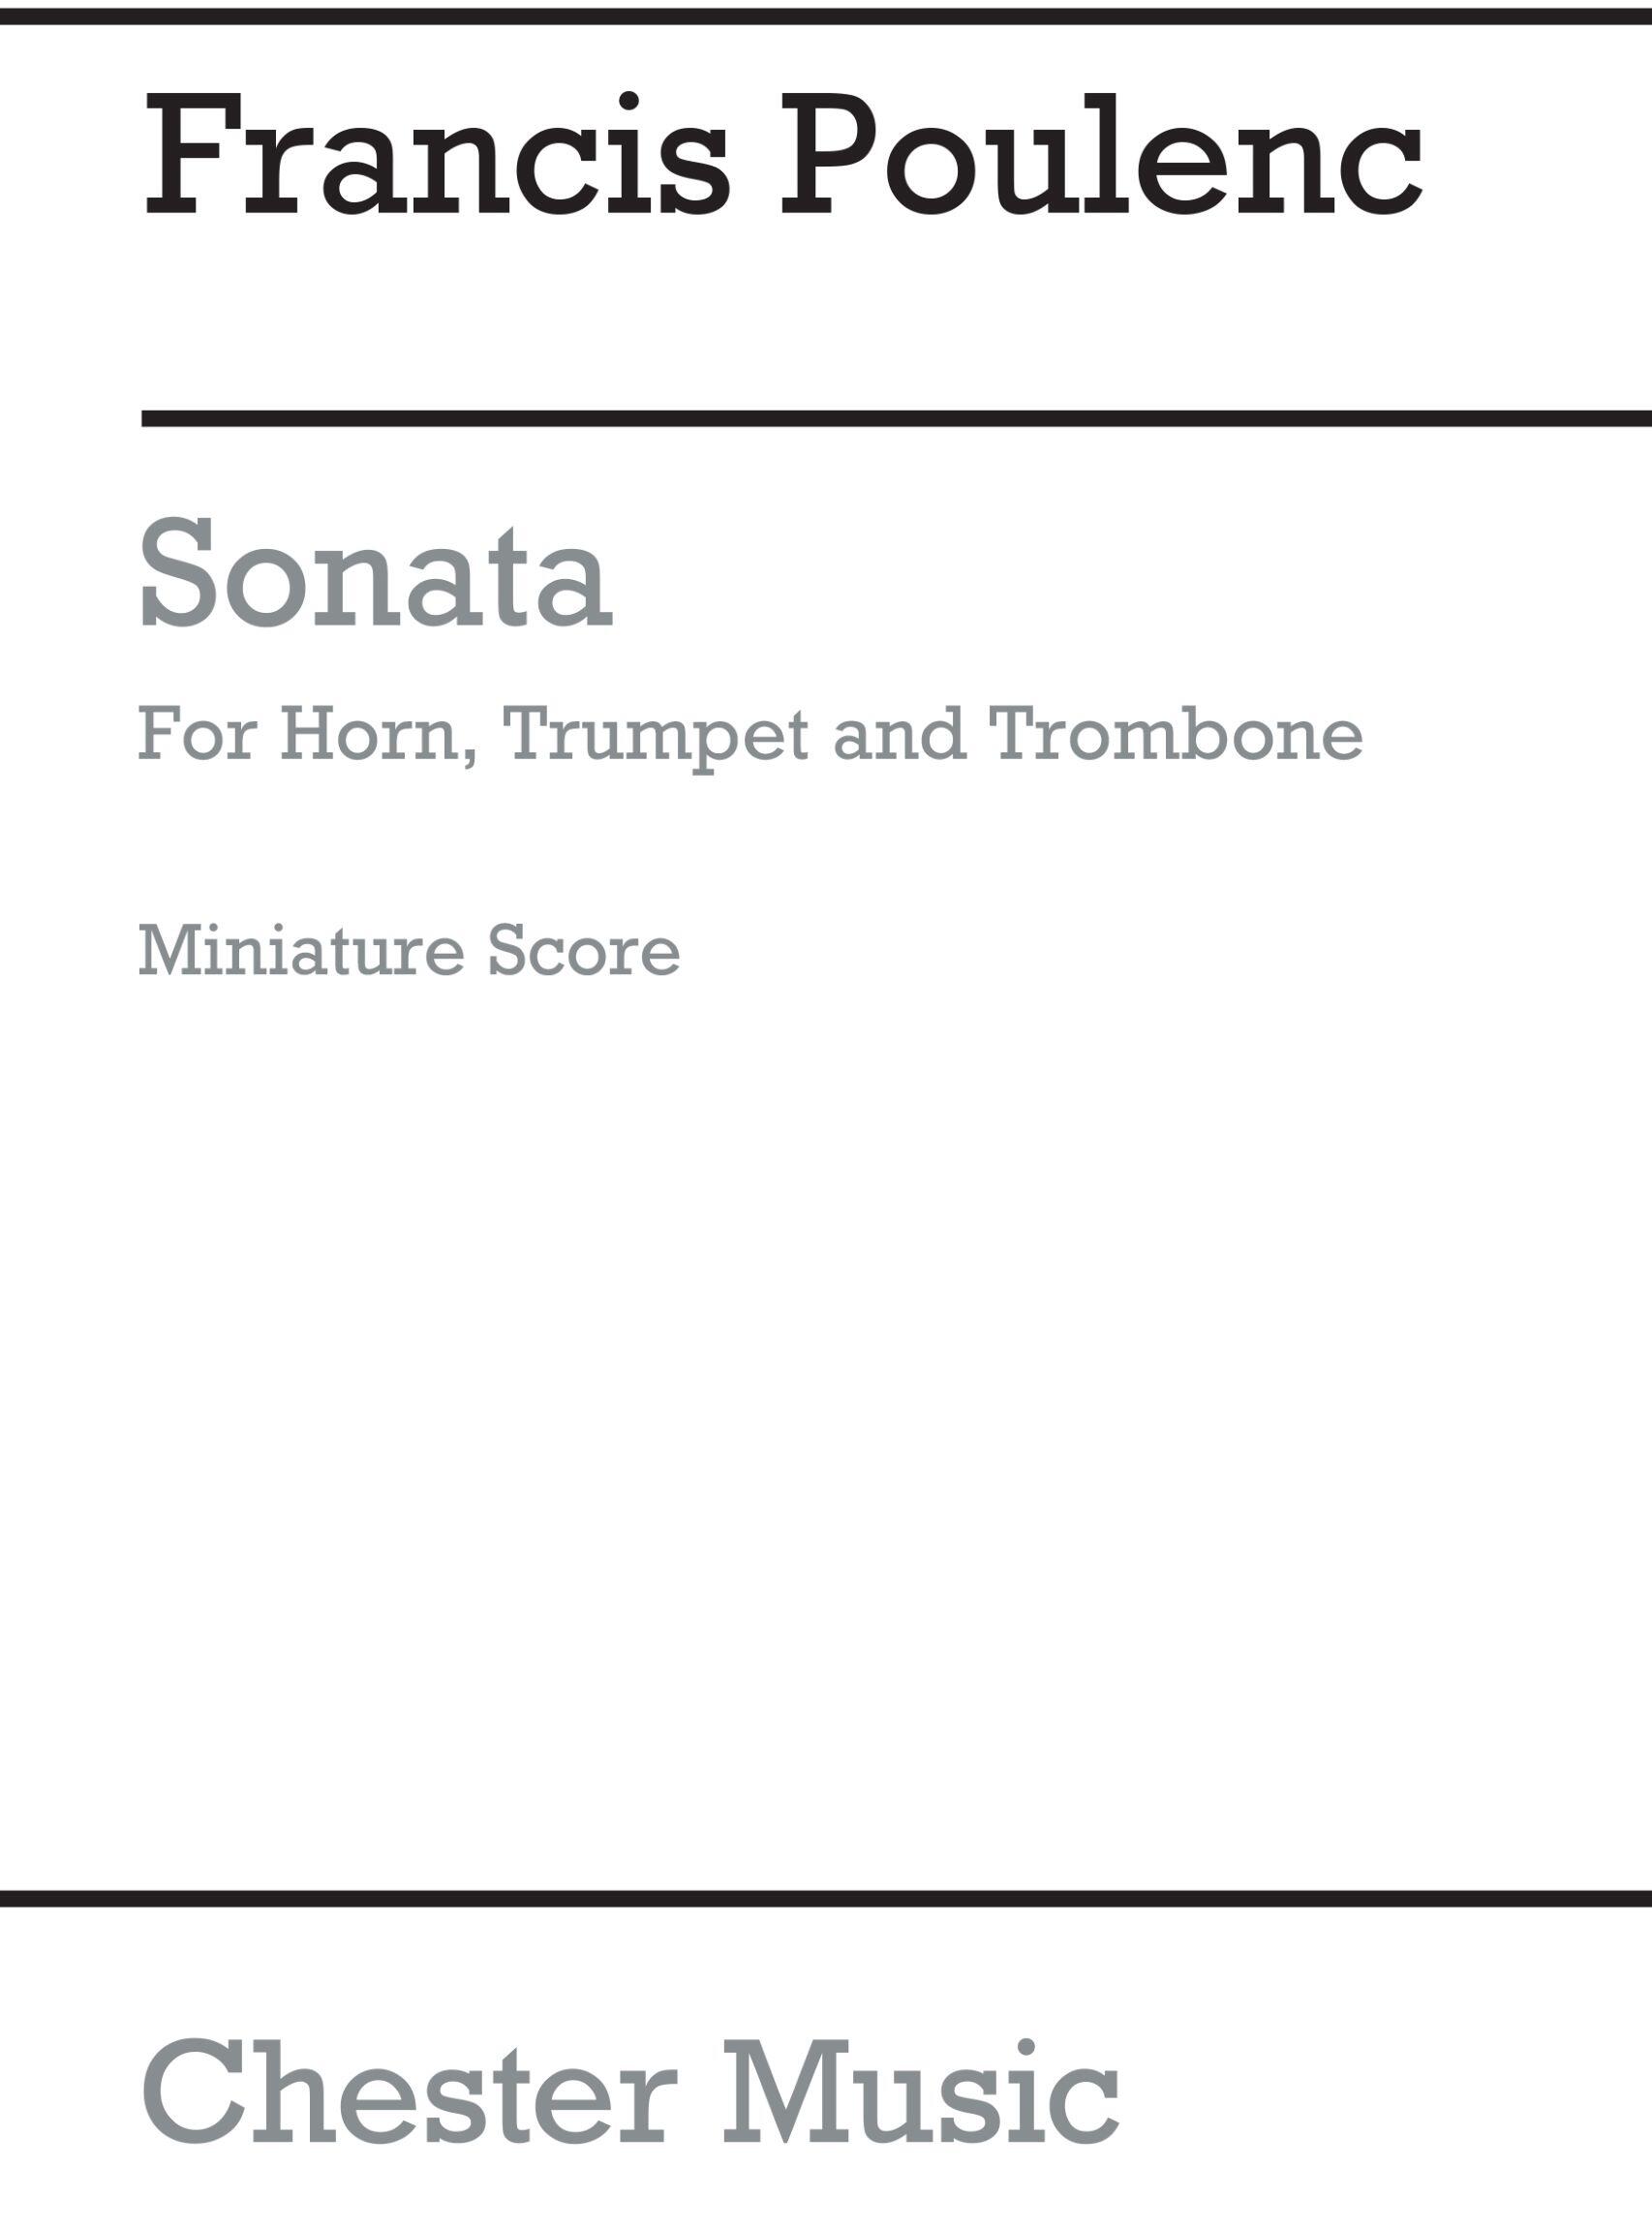 Chester Music Sonata For Horn, Trumpet And Trombone : photo 1